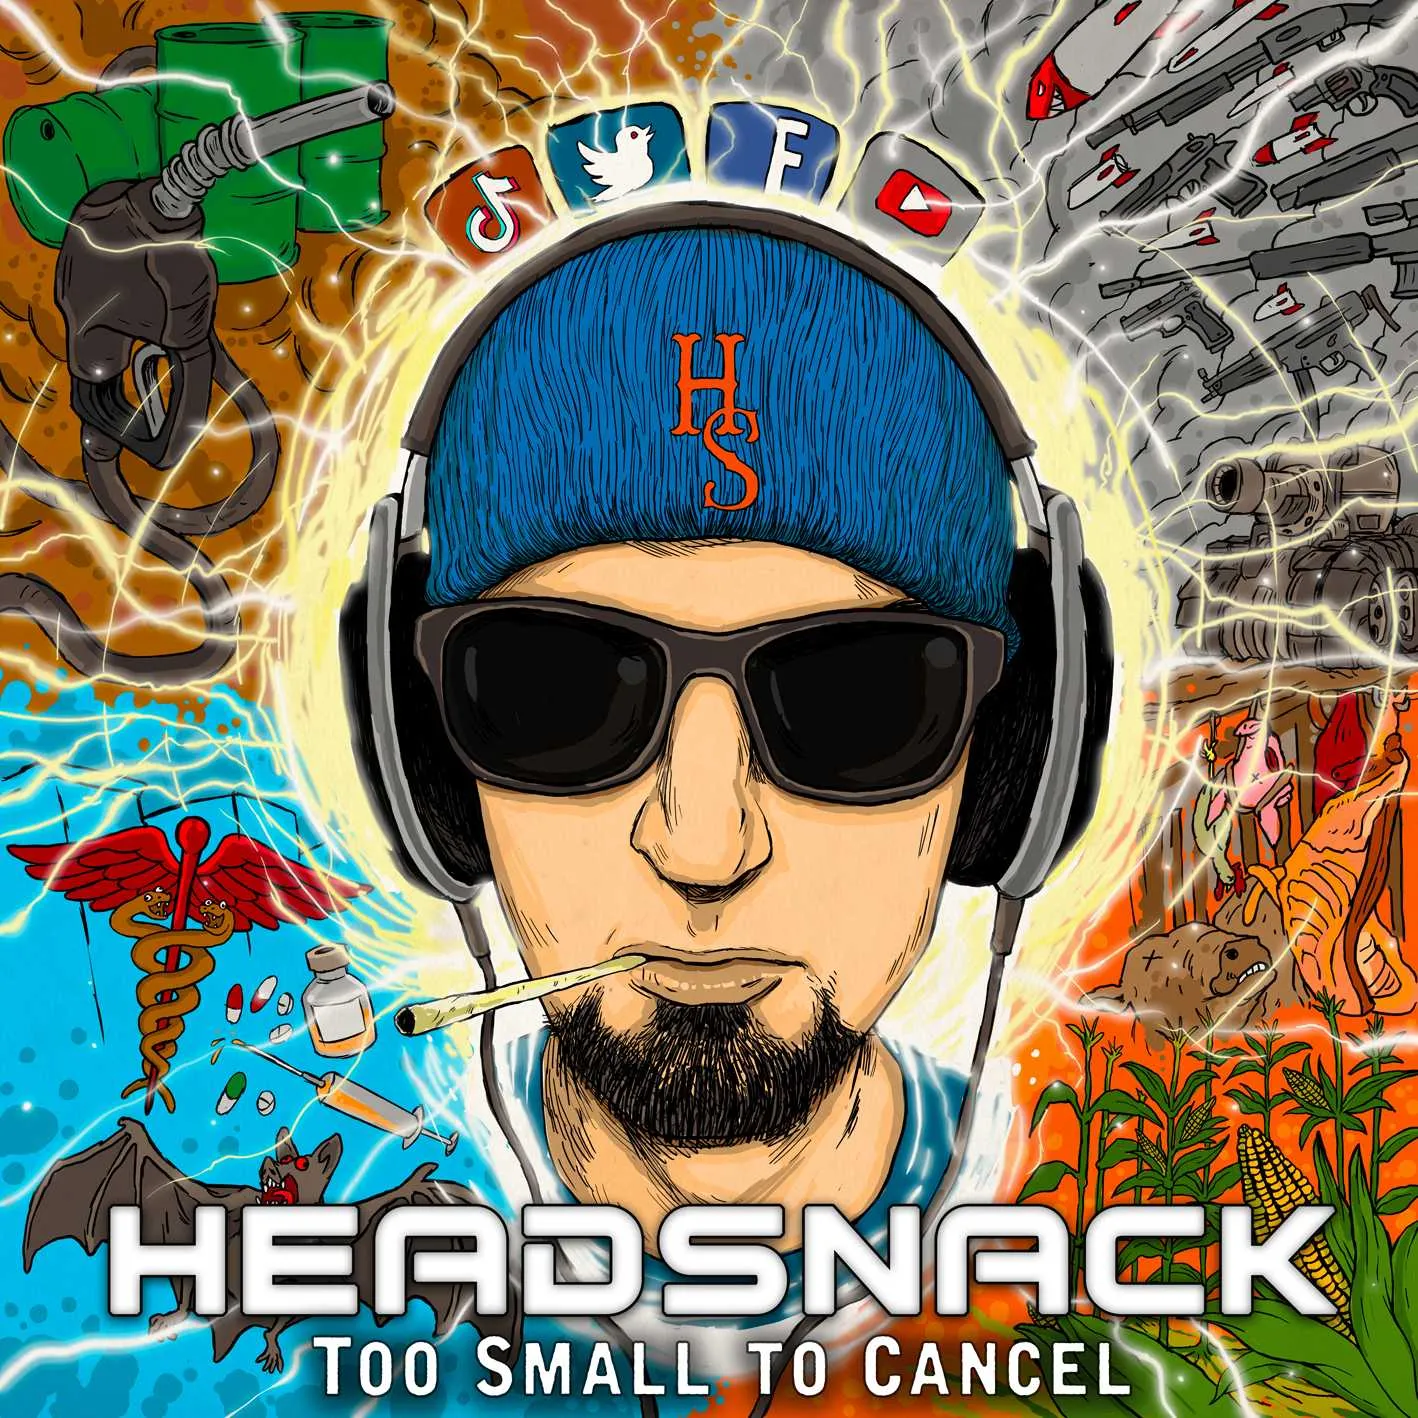 Album cover for “Too Small To Cancel” by Headsnack